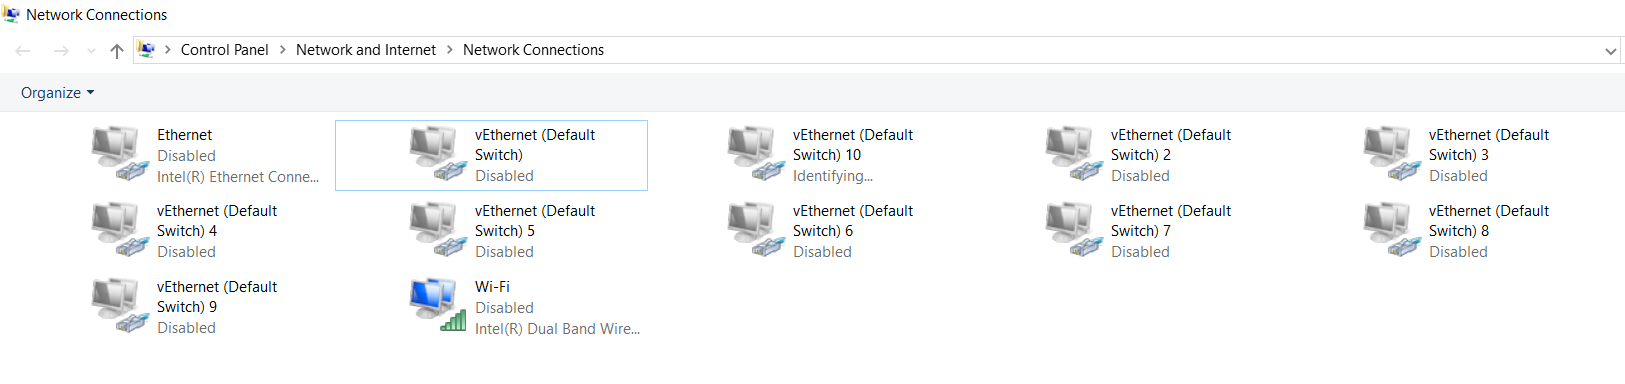 Duplicate vEthernet Switch Adapters? 9c02X.png